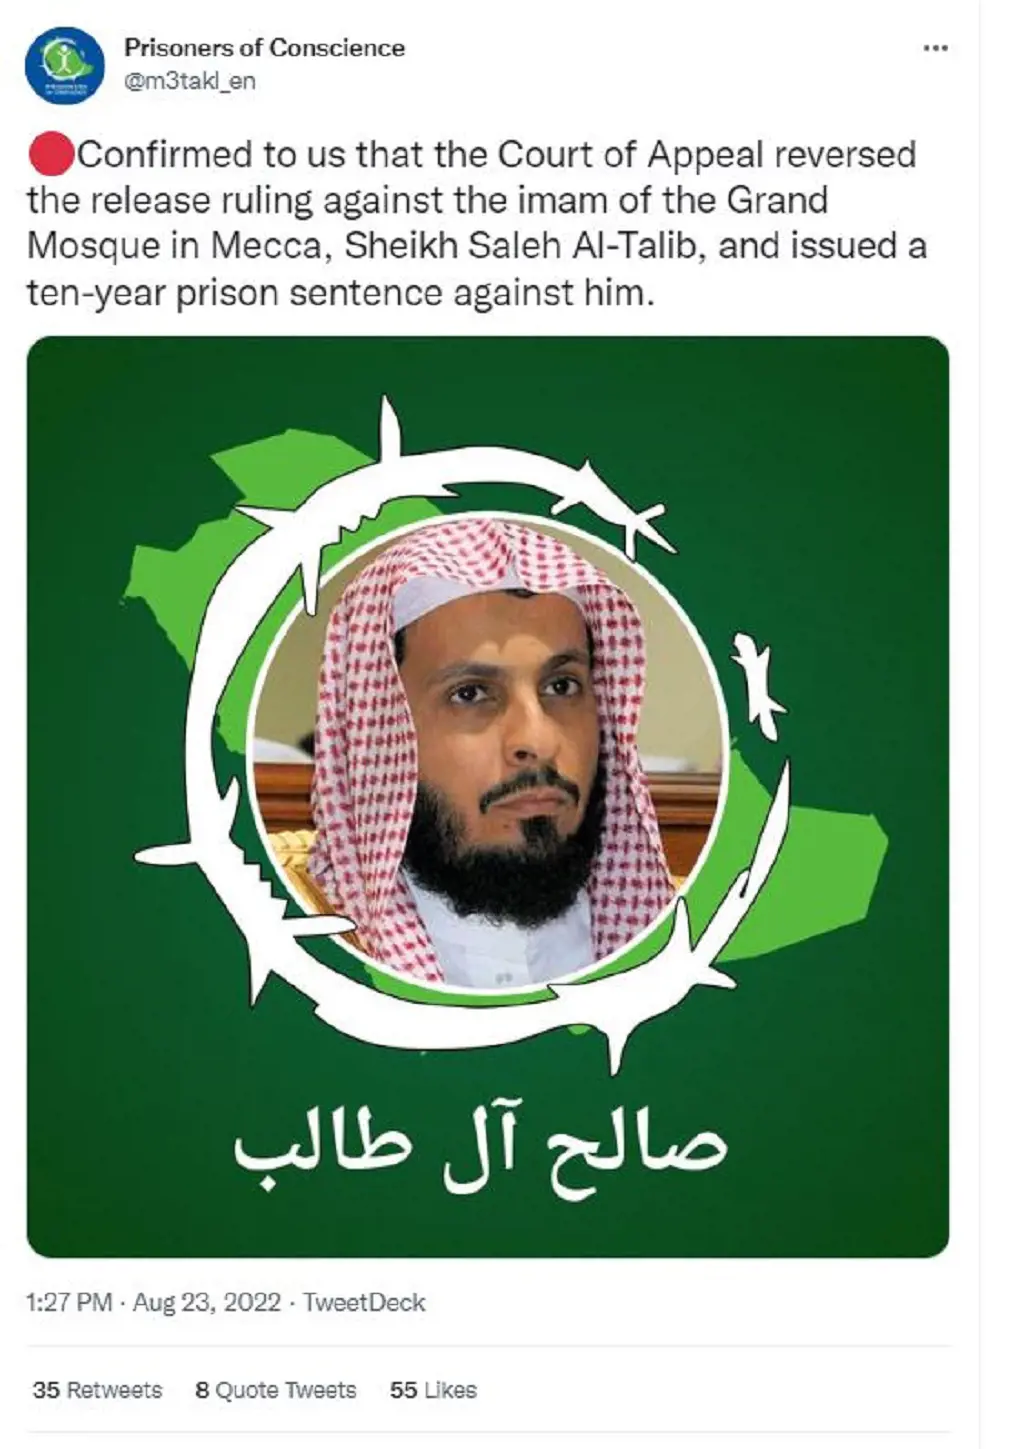 Confirmed  that the Court of Appeal reversed the release ruling against the imam of the Grand Mosque in Mecca, Sheikh Saleh Al-Talib